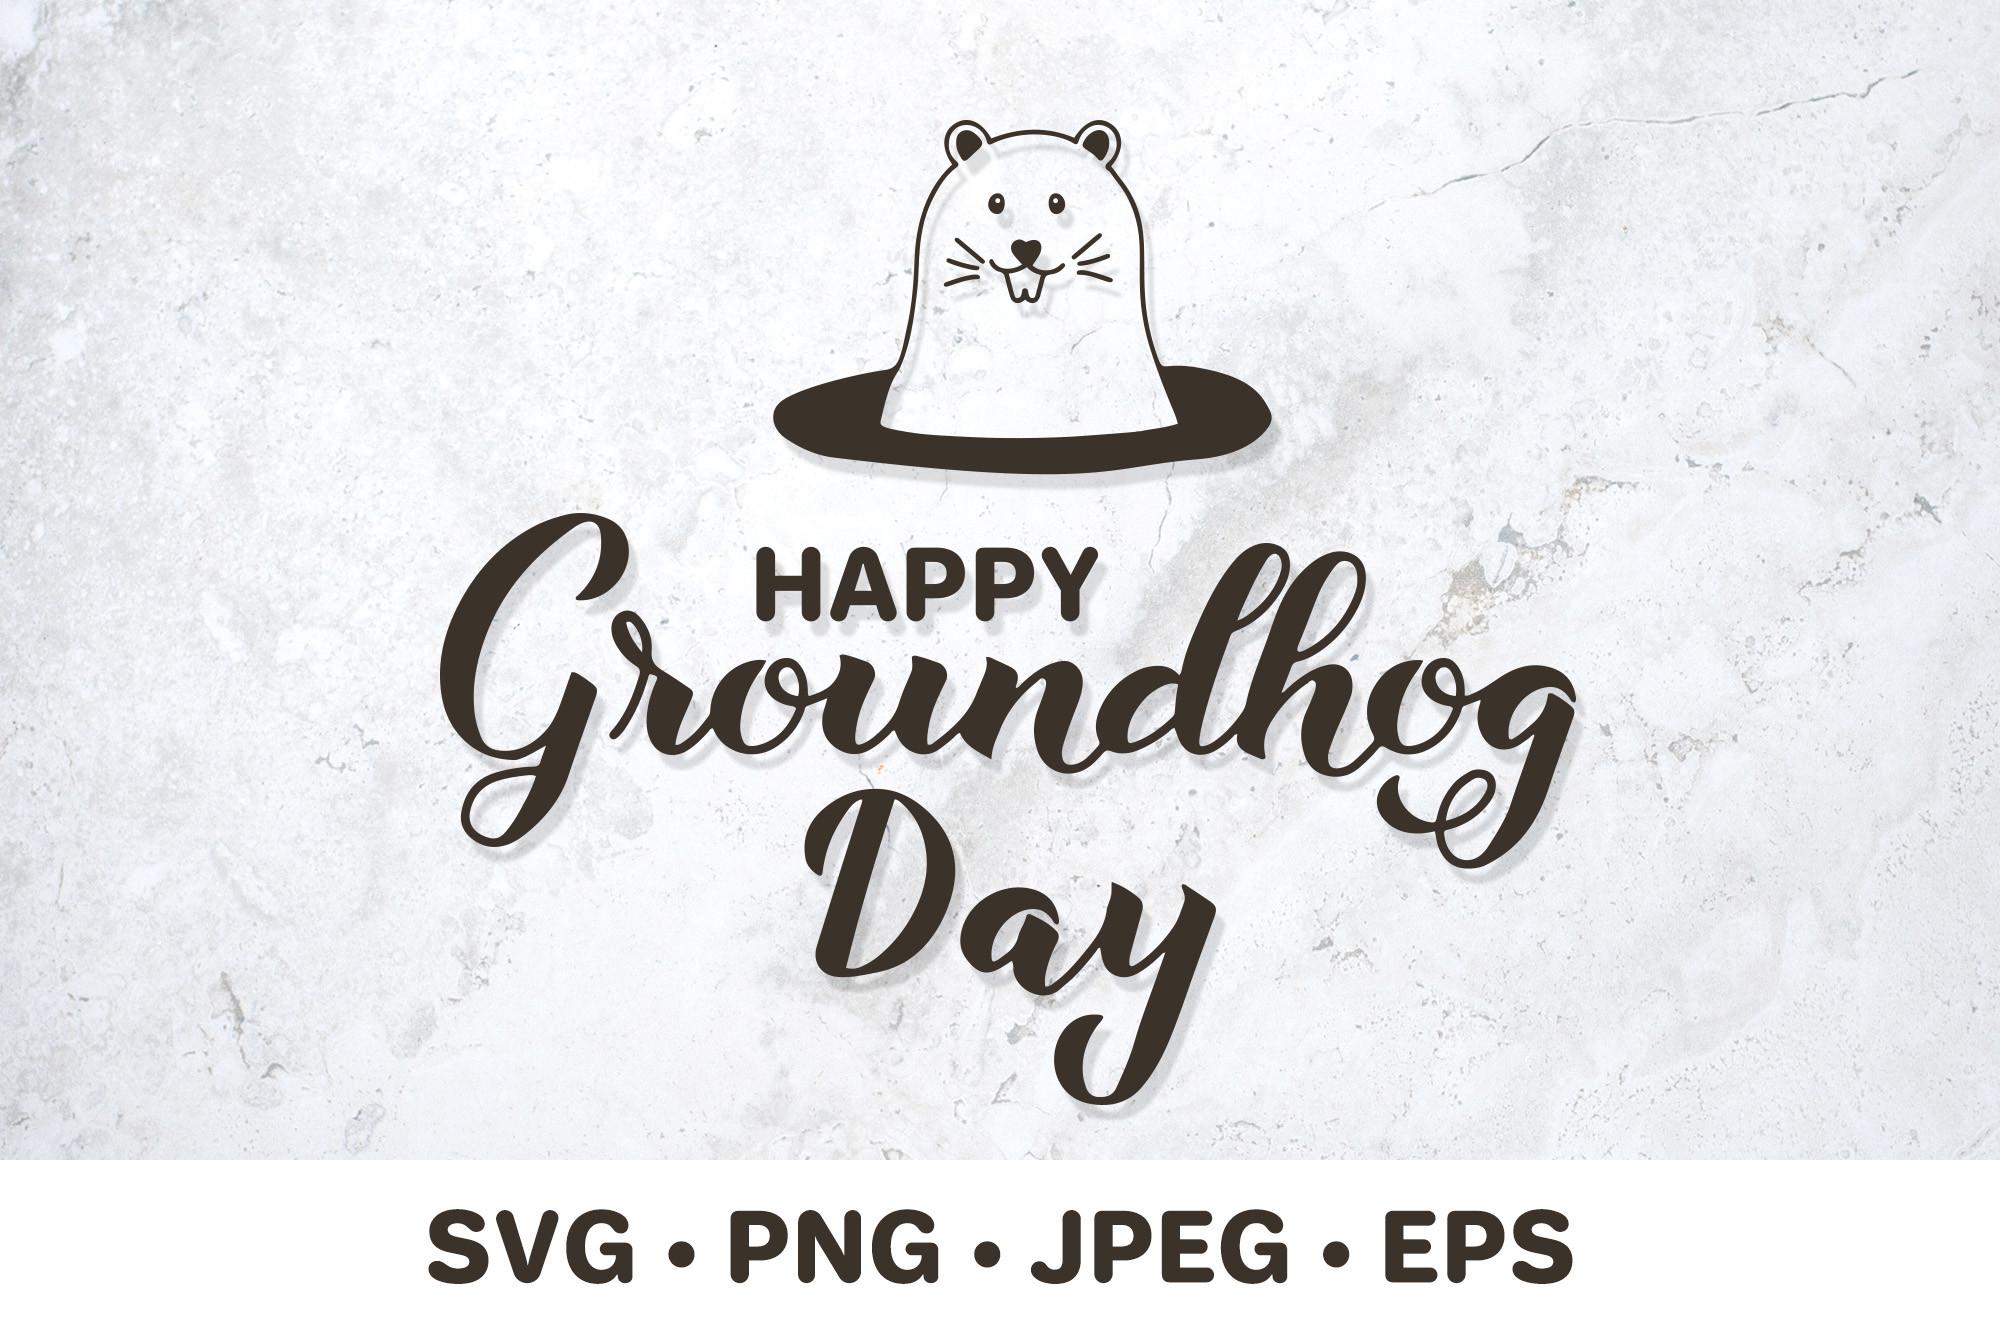 Happy Groundhog Day Lettering.